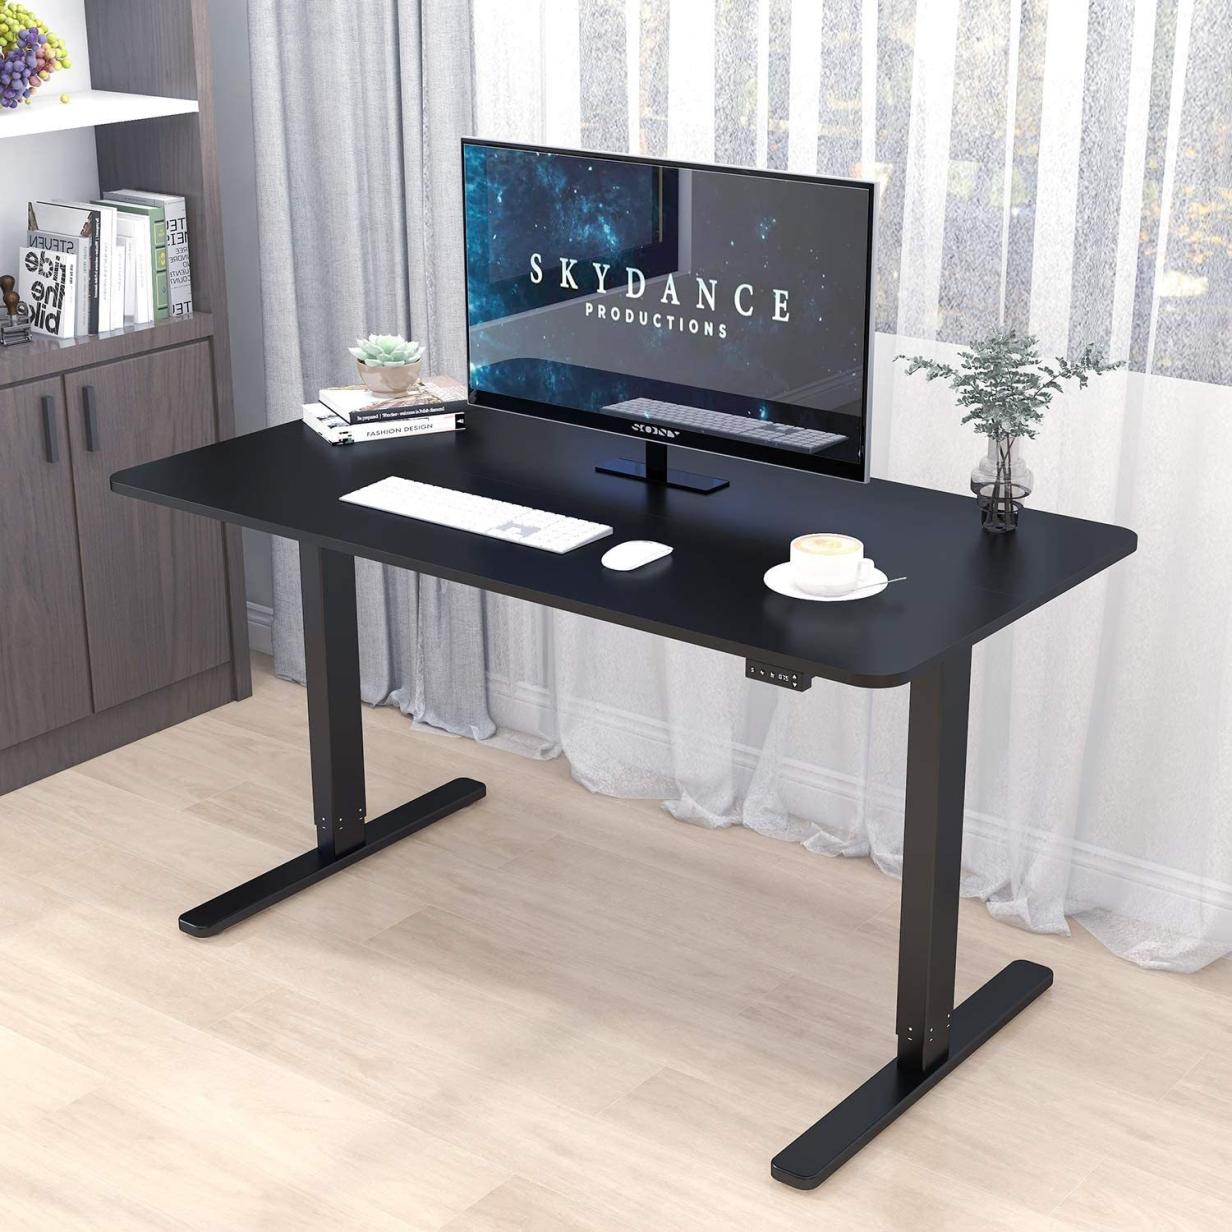 Why Should I Invest in a Standing Desk?